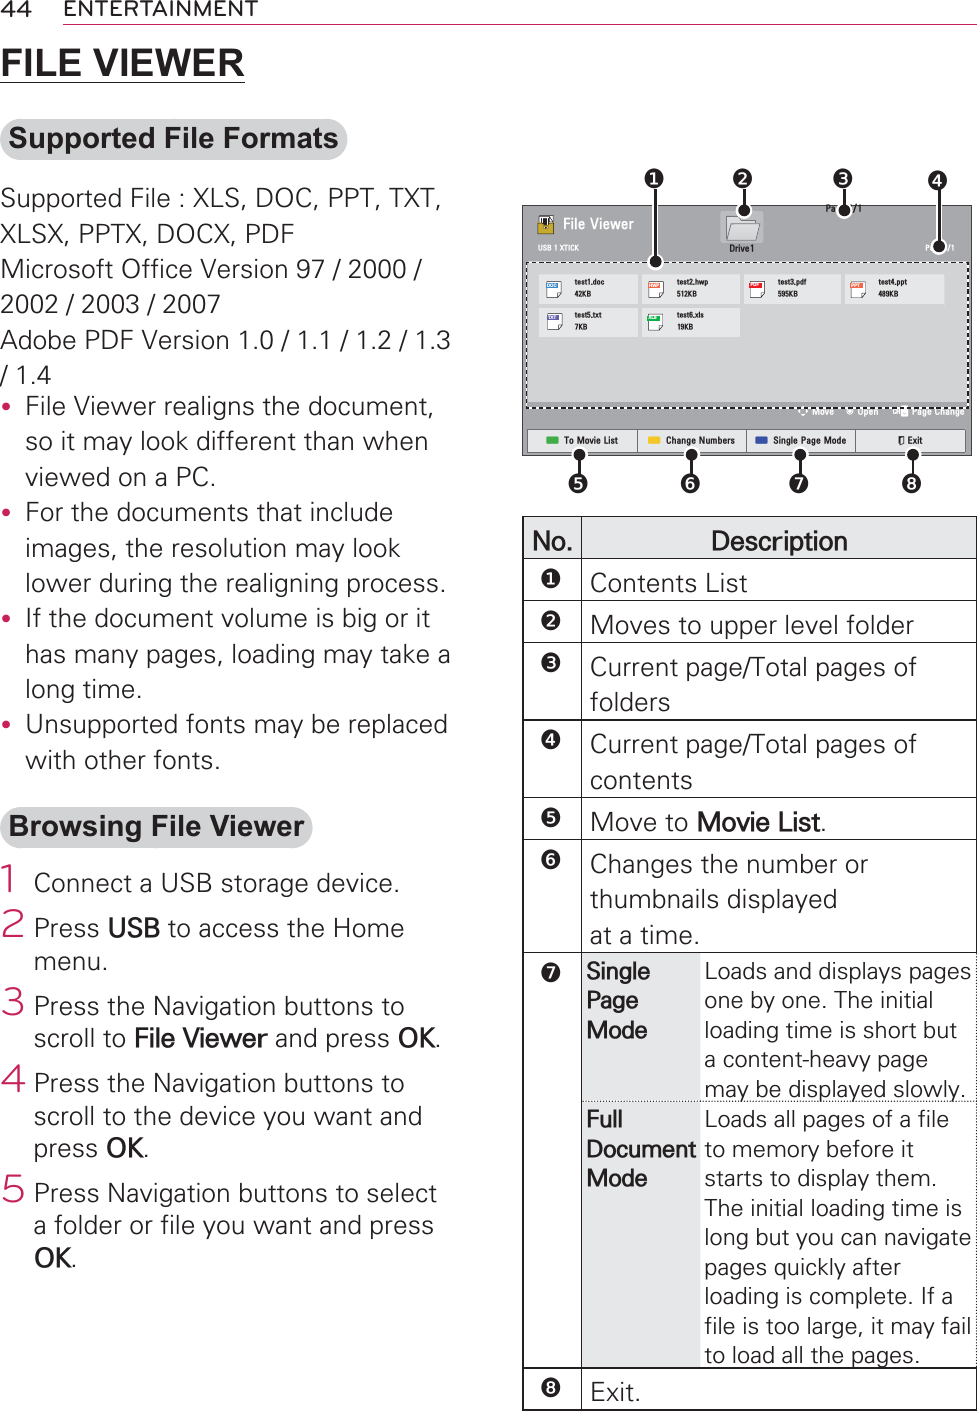 44 ENTERTAINMENTFILE VIEWERSupported File FormatsSupported File : XLS, DOC, PPT, TXT, XLSX, PPTX, DOCX, PDFMicrosoft Office Version 97 / 2000 / 2002 / 2003 / 2007Adobe PDF Version 1.0 / 1.1 / 1.2 / 1.3 / 1.4y File Viewer realigns the document, so it may look different than when viewed on a PC.y For the documents that include images, the resolution may look lower during the realigning process.y If the document volume is big or it has many pages, loading may take a  long time.y Unsupported fonts may be replaced with other fonts.Browsing File Viewer1  Connect a USB storage device.2 Press USB to access the Home menu.3 Press the Navigation buttons to scroll to File Viewer and press OK.4 Press the Navigation buttons to scroll to the device you want and press OK.5 Press Navigation buttons to select a folder or file you want and press OK.3DJH)LOH9LHZHU3DJH&apos;ULYH86%;7,&amp;.ᯒ0RYHᯙ2SHQ᱇3DJH&amp;KDQJHᯕ7R0RYLH/LVW ᯕ&amp;KDQJH1XPEHUV ᯕ6LQJOH3DJH0RGH ᰿([LWDOC WHVWGRF.%HWP WHVWKZS.%PDF WHVWSGI.%PPT WHVWSSW.%TXT WHVWW[W.%XLS WHVW[OV.%❸❷ ❹❶❺❻❼❽No. Description❶Contents List❷Moves to upper level folder❸Current page/Total pages of folders❹Current page/Total pages of contents❺Move to Movie List.❻Changes the number or thumbnails displayedat a time.❼Single Page ModeLoads and displays pages one by one. The initial loading time is short but a content-heavy page may be displayed slowly.Full Document ModeLoads all pages of a file to memory before it starts to display them. The initial loading time is long but you can navigate pages quickly after loading is complete. If a file is too large, it may fail to load all the pages.❽Exit.